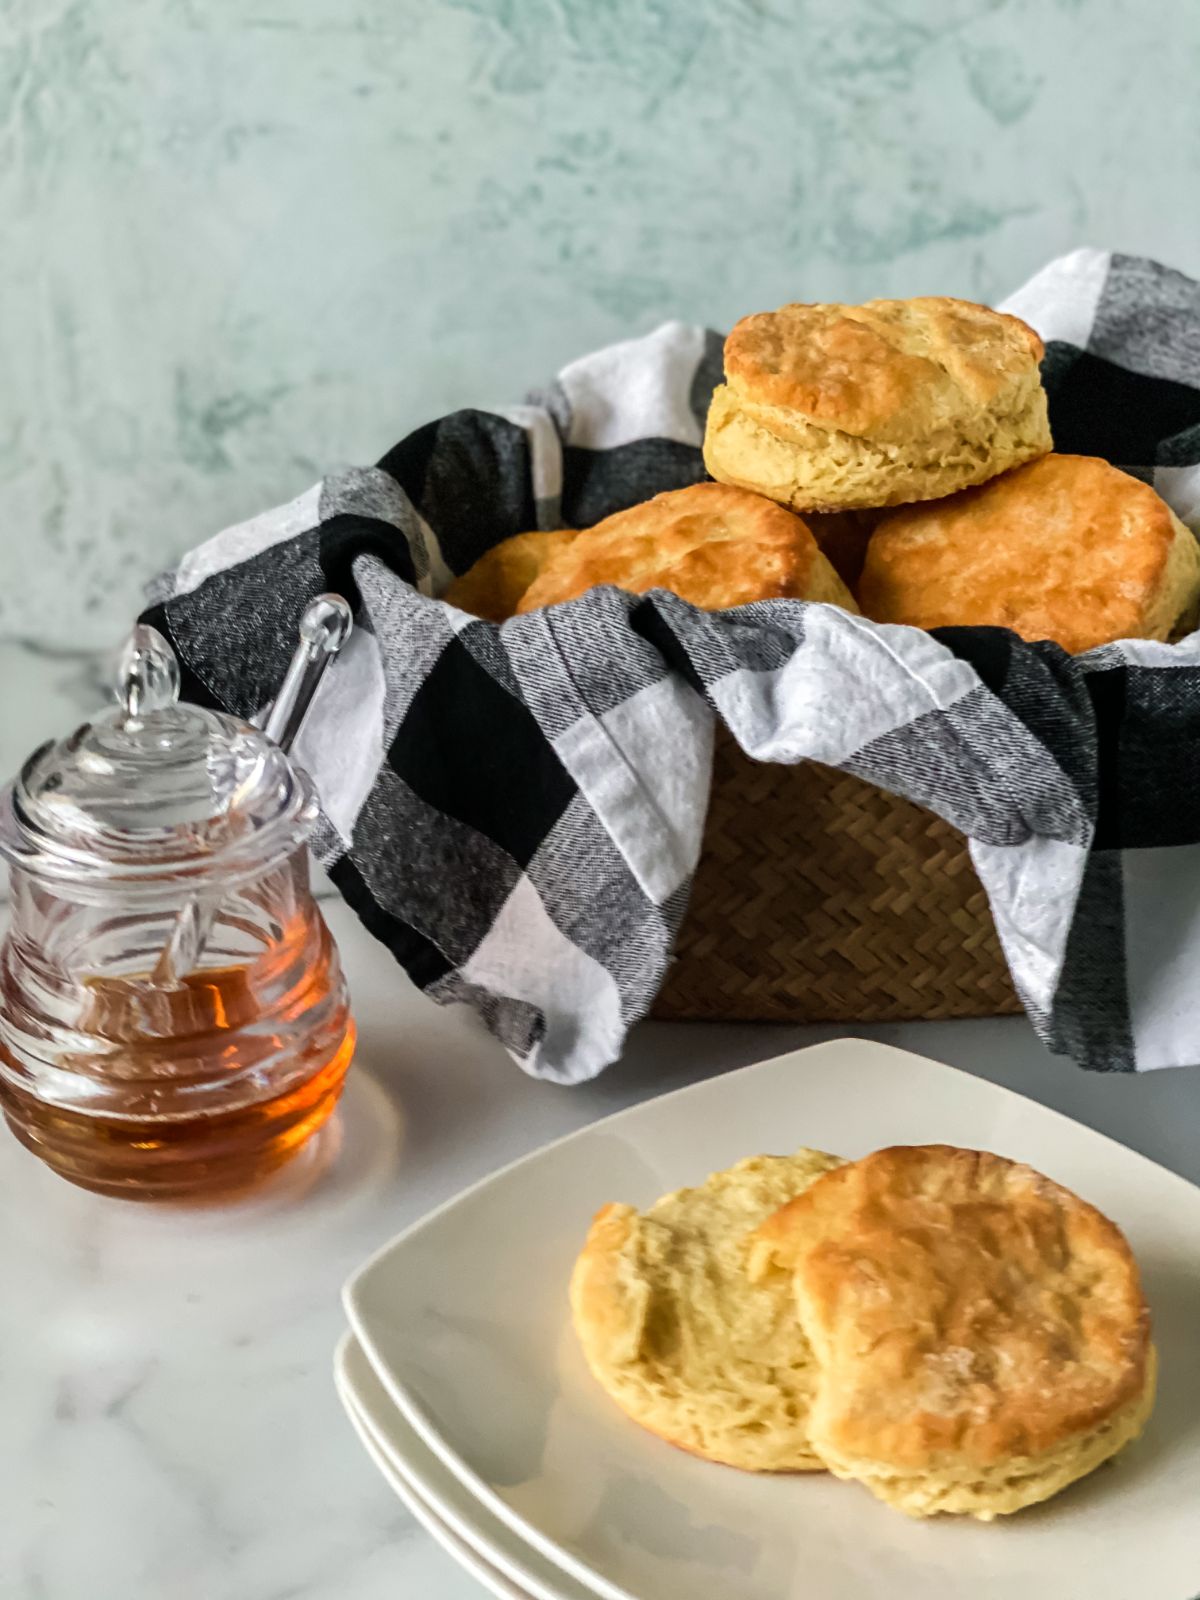 basket of biscuits behind white saucer holding single biscuit